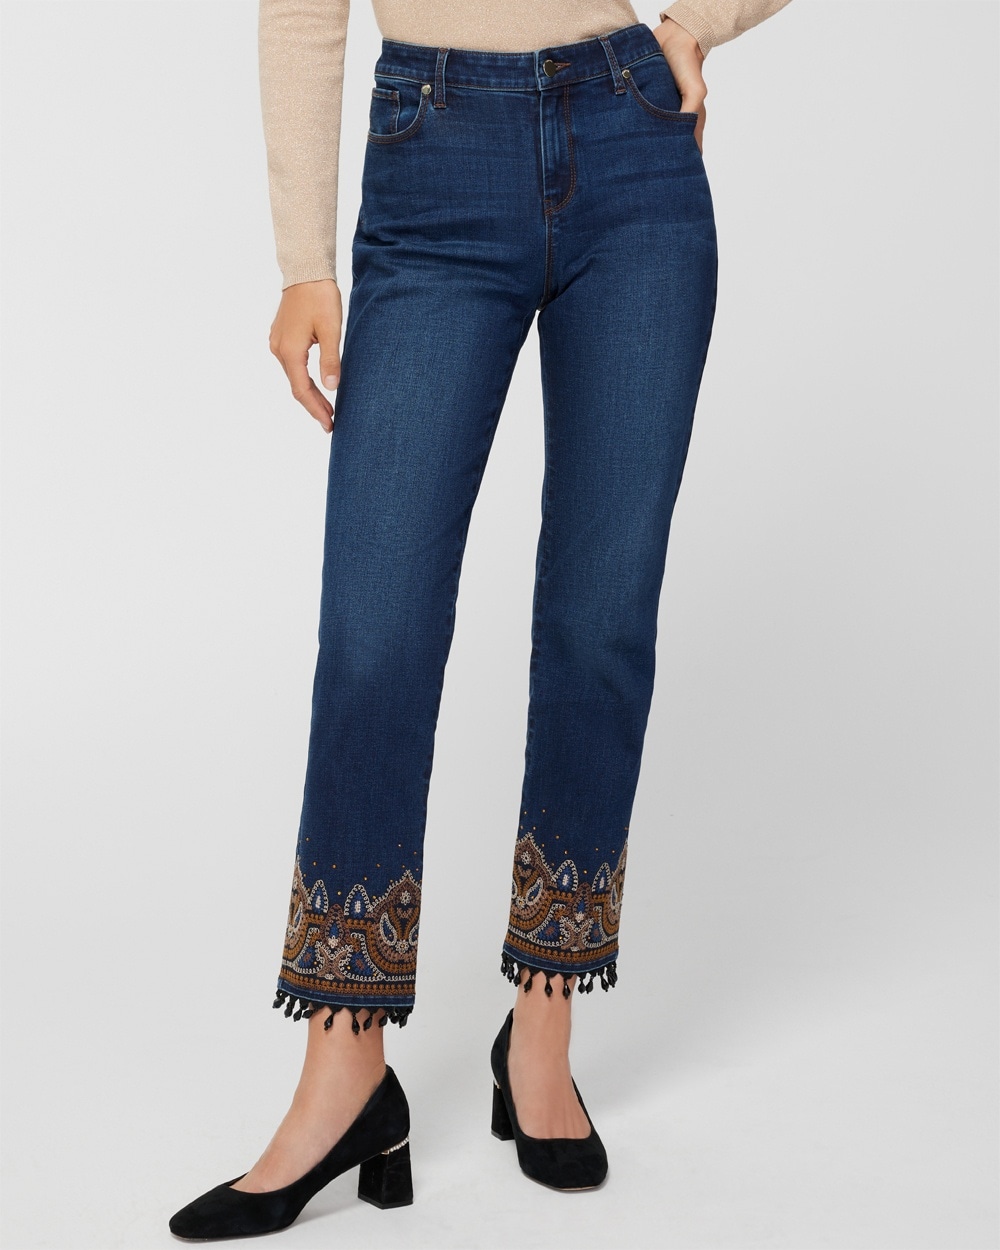 Embroidered Beaded Fringe Girlfriend Ankle Jeans